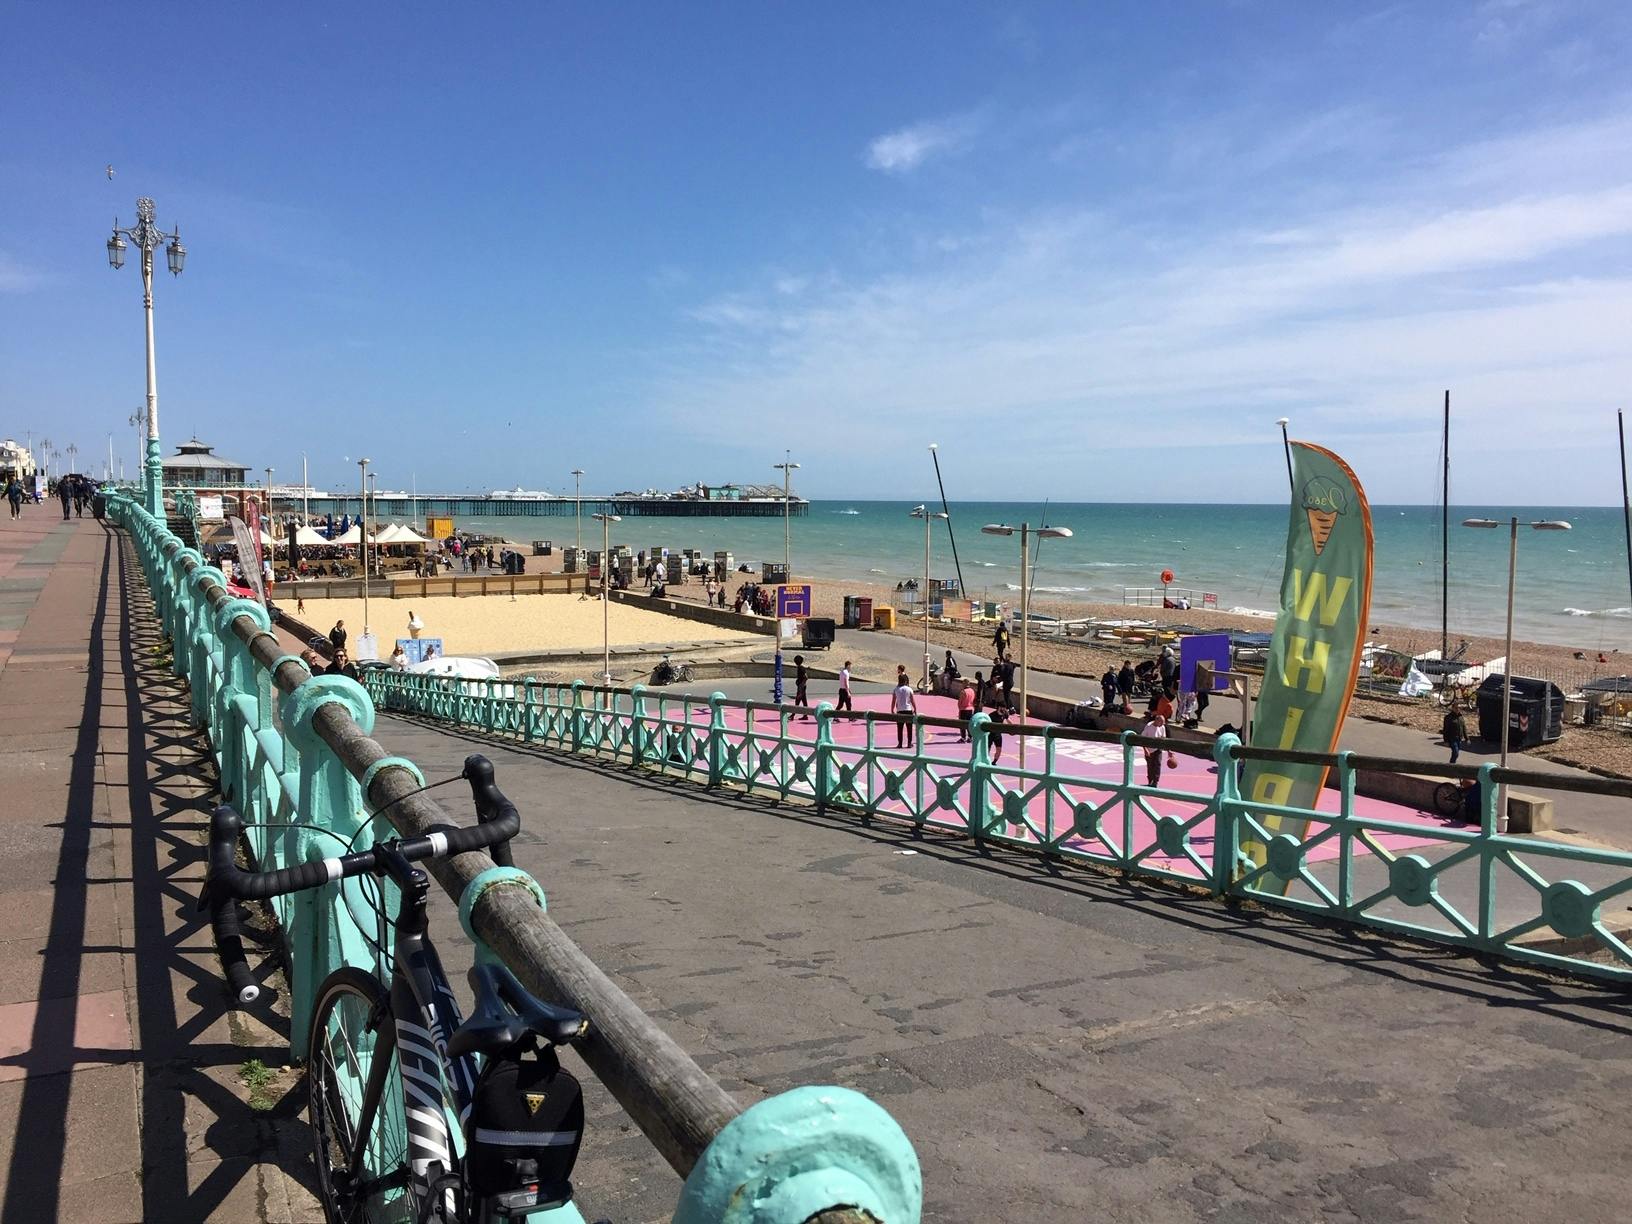 Tour Brighton's highlights with an exploration game mobile app Musement